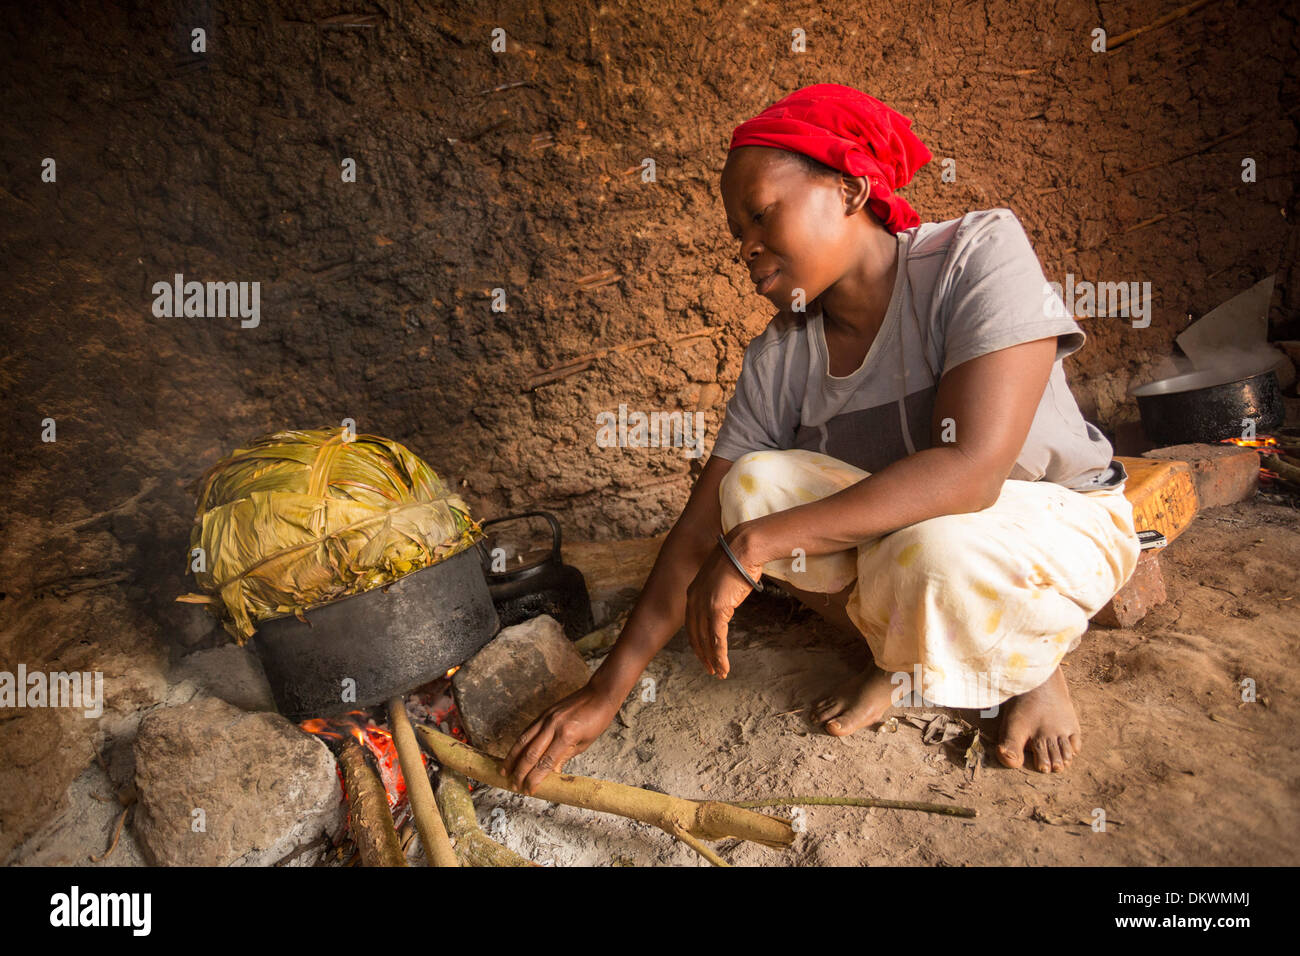 Woman cooking with banana leaves in kitchen - Gombe, Uganda, East Africa. Stock Photo